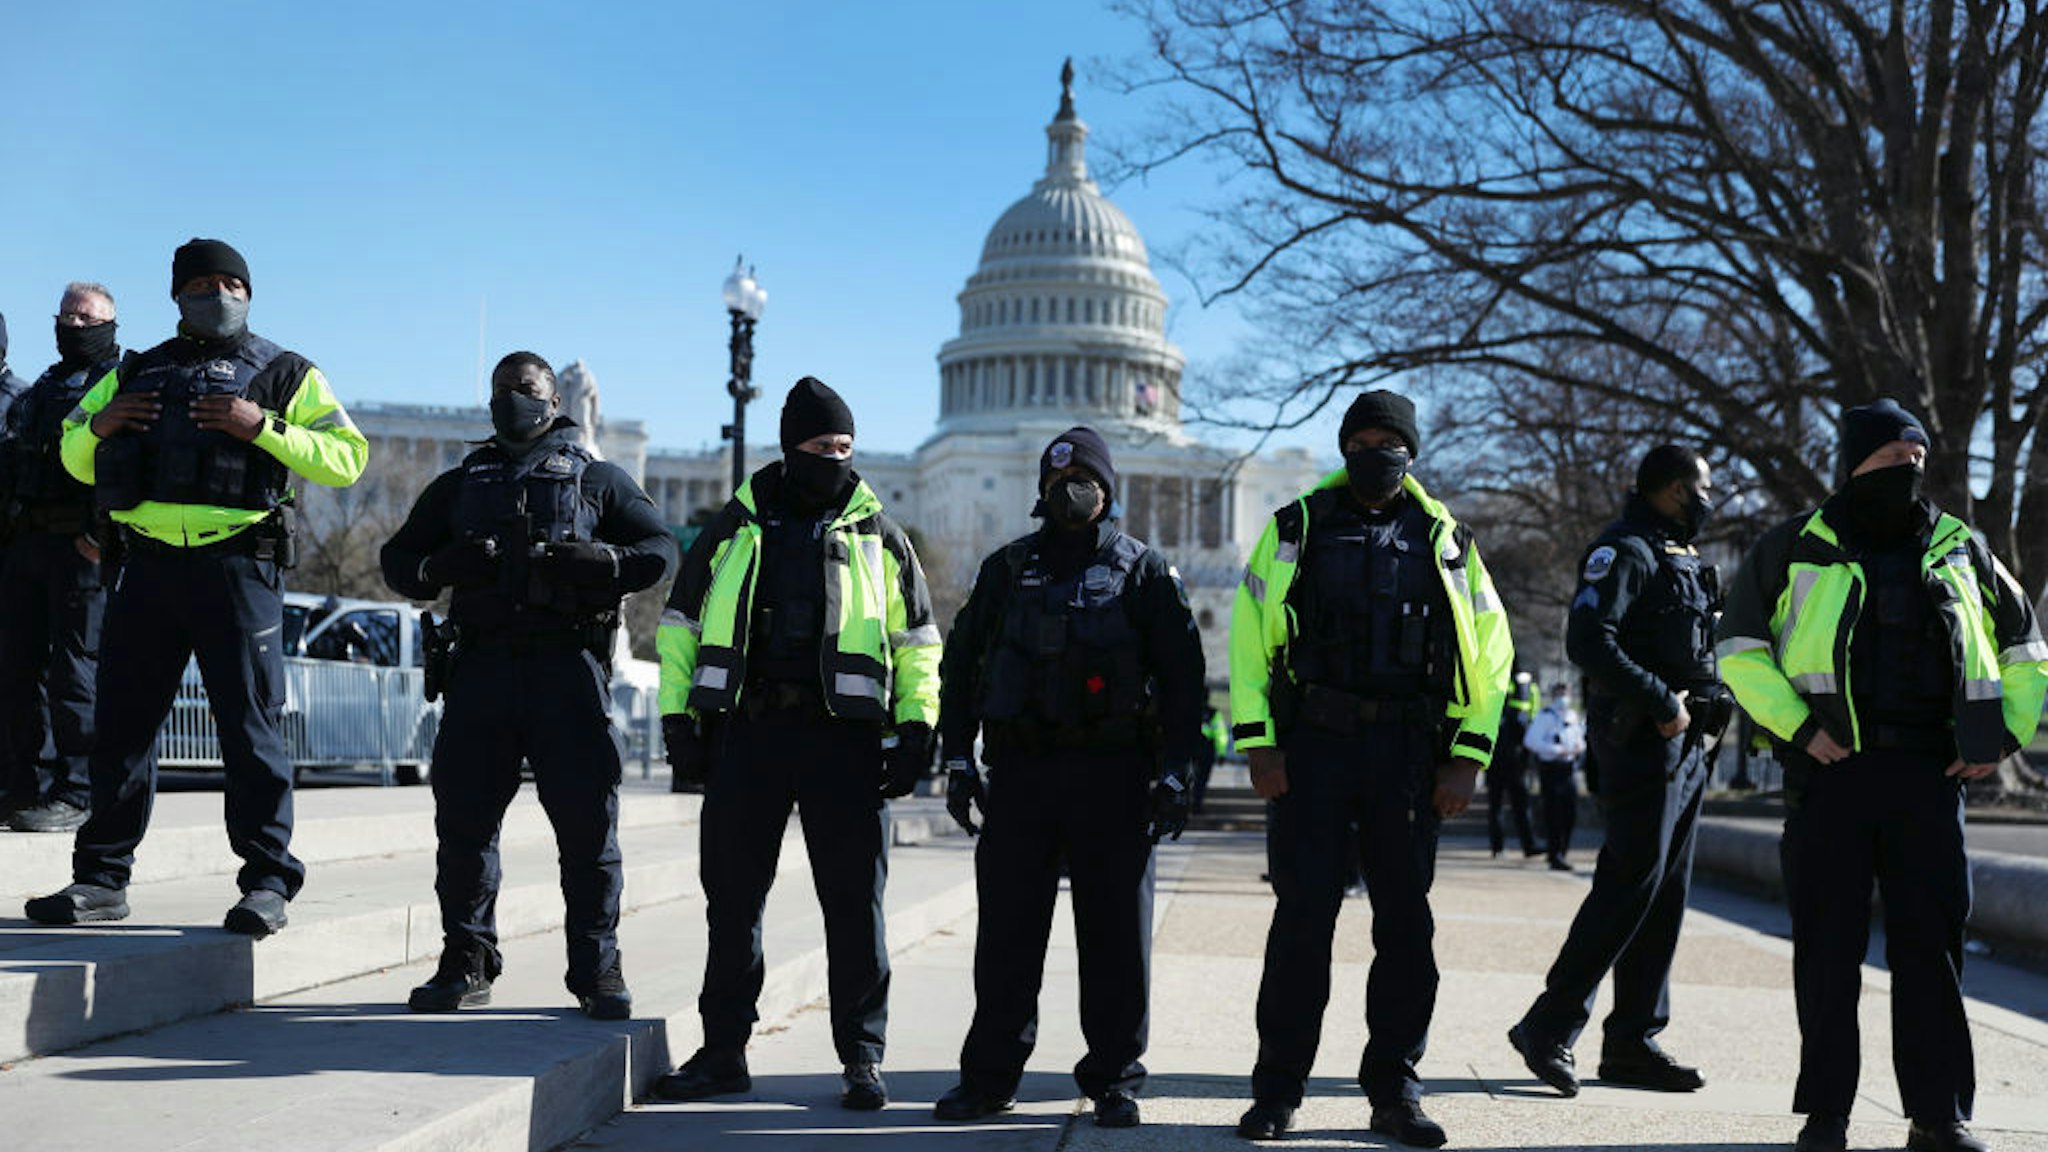 WASHINGTON, DC - JANUARY 07: Members of the Metropolitan Police Department of the District of Columbia are seen in front of the U.S. Capitol a day after a pro-Trump mob broke into the building on January 07, 2021 in Washington, DC. Congress finished tallying the Electoral College votes and Joe Biden was certified as the winner of the 2020 presidential election. (Photo by Joe Raedle/Getty Images)